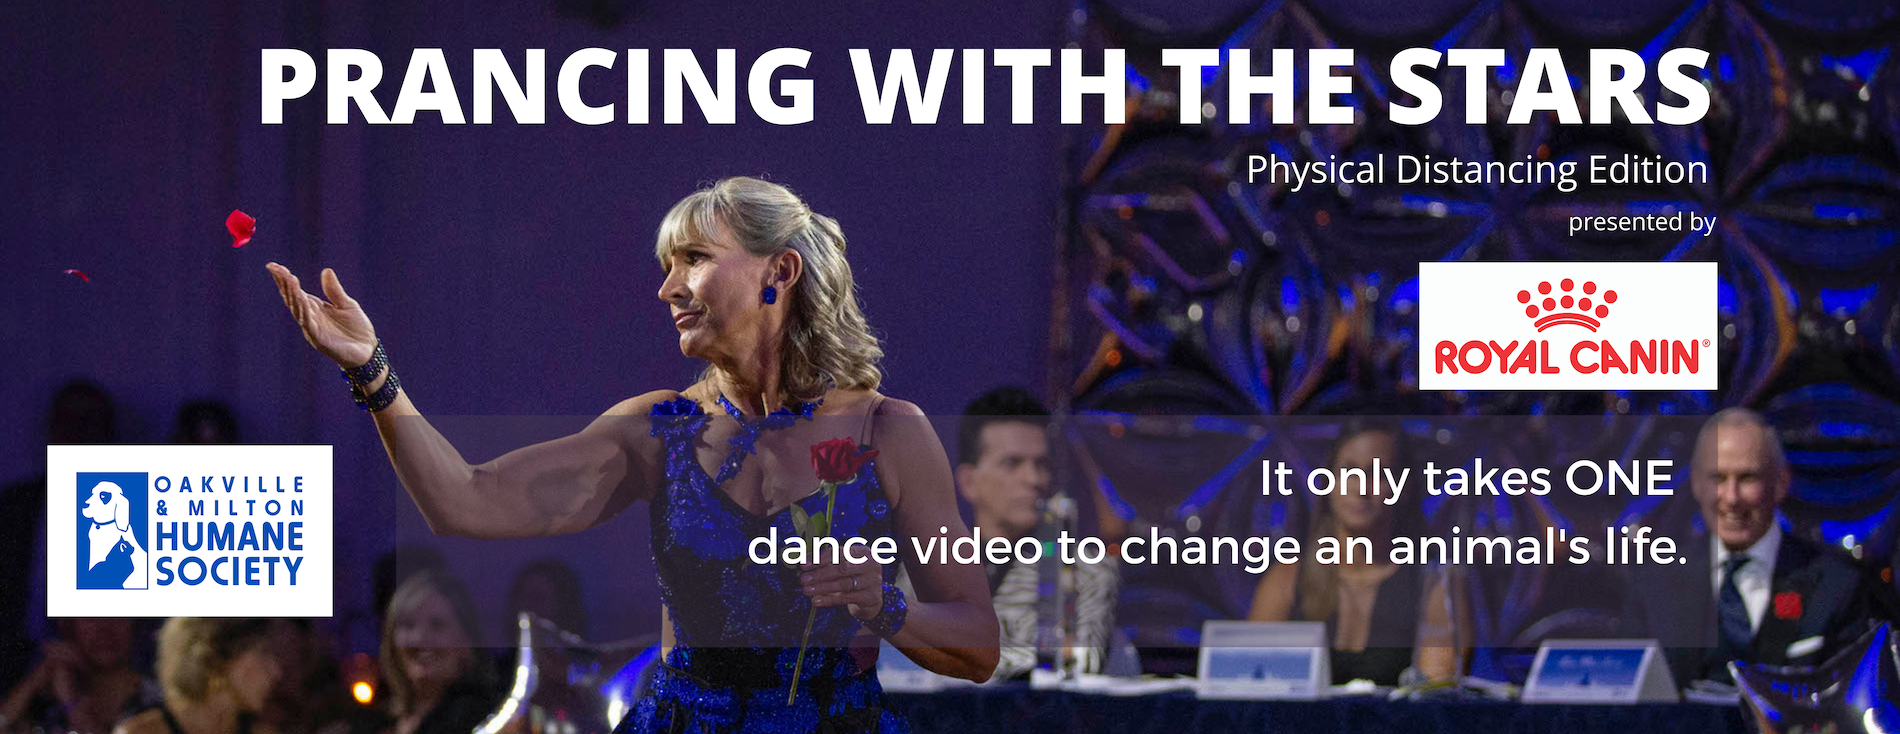 Prancing with the Stars - Physical Distancing Edition